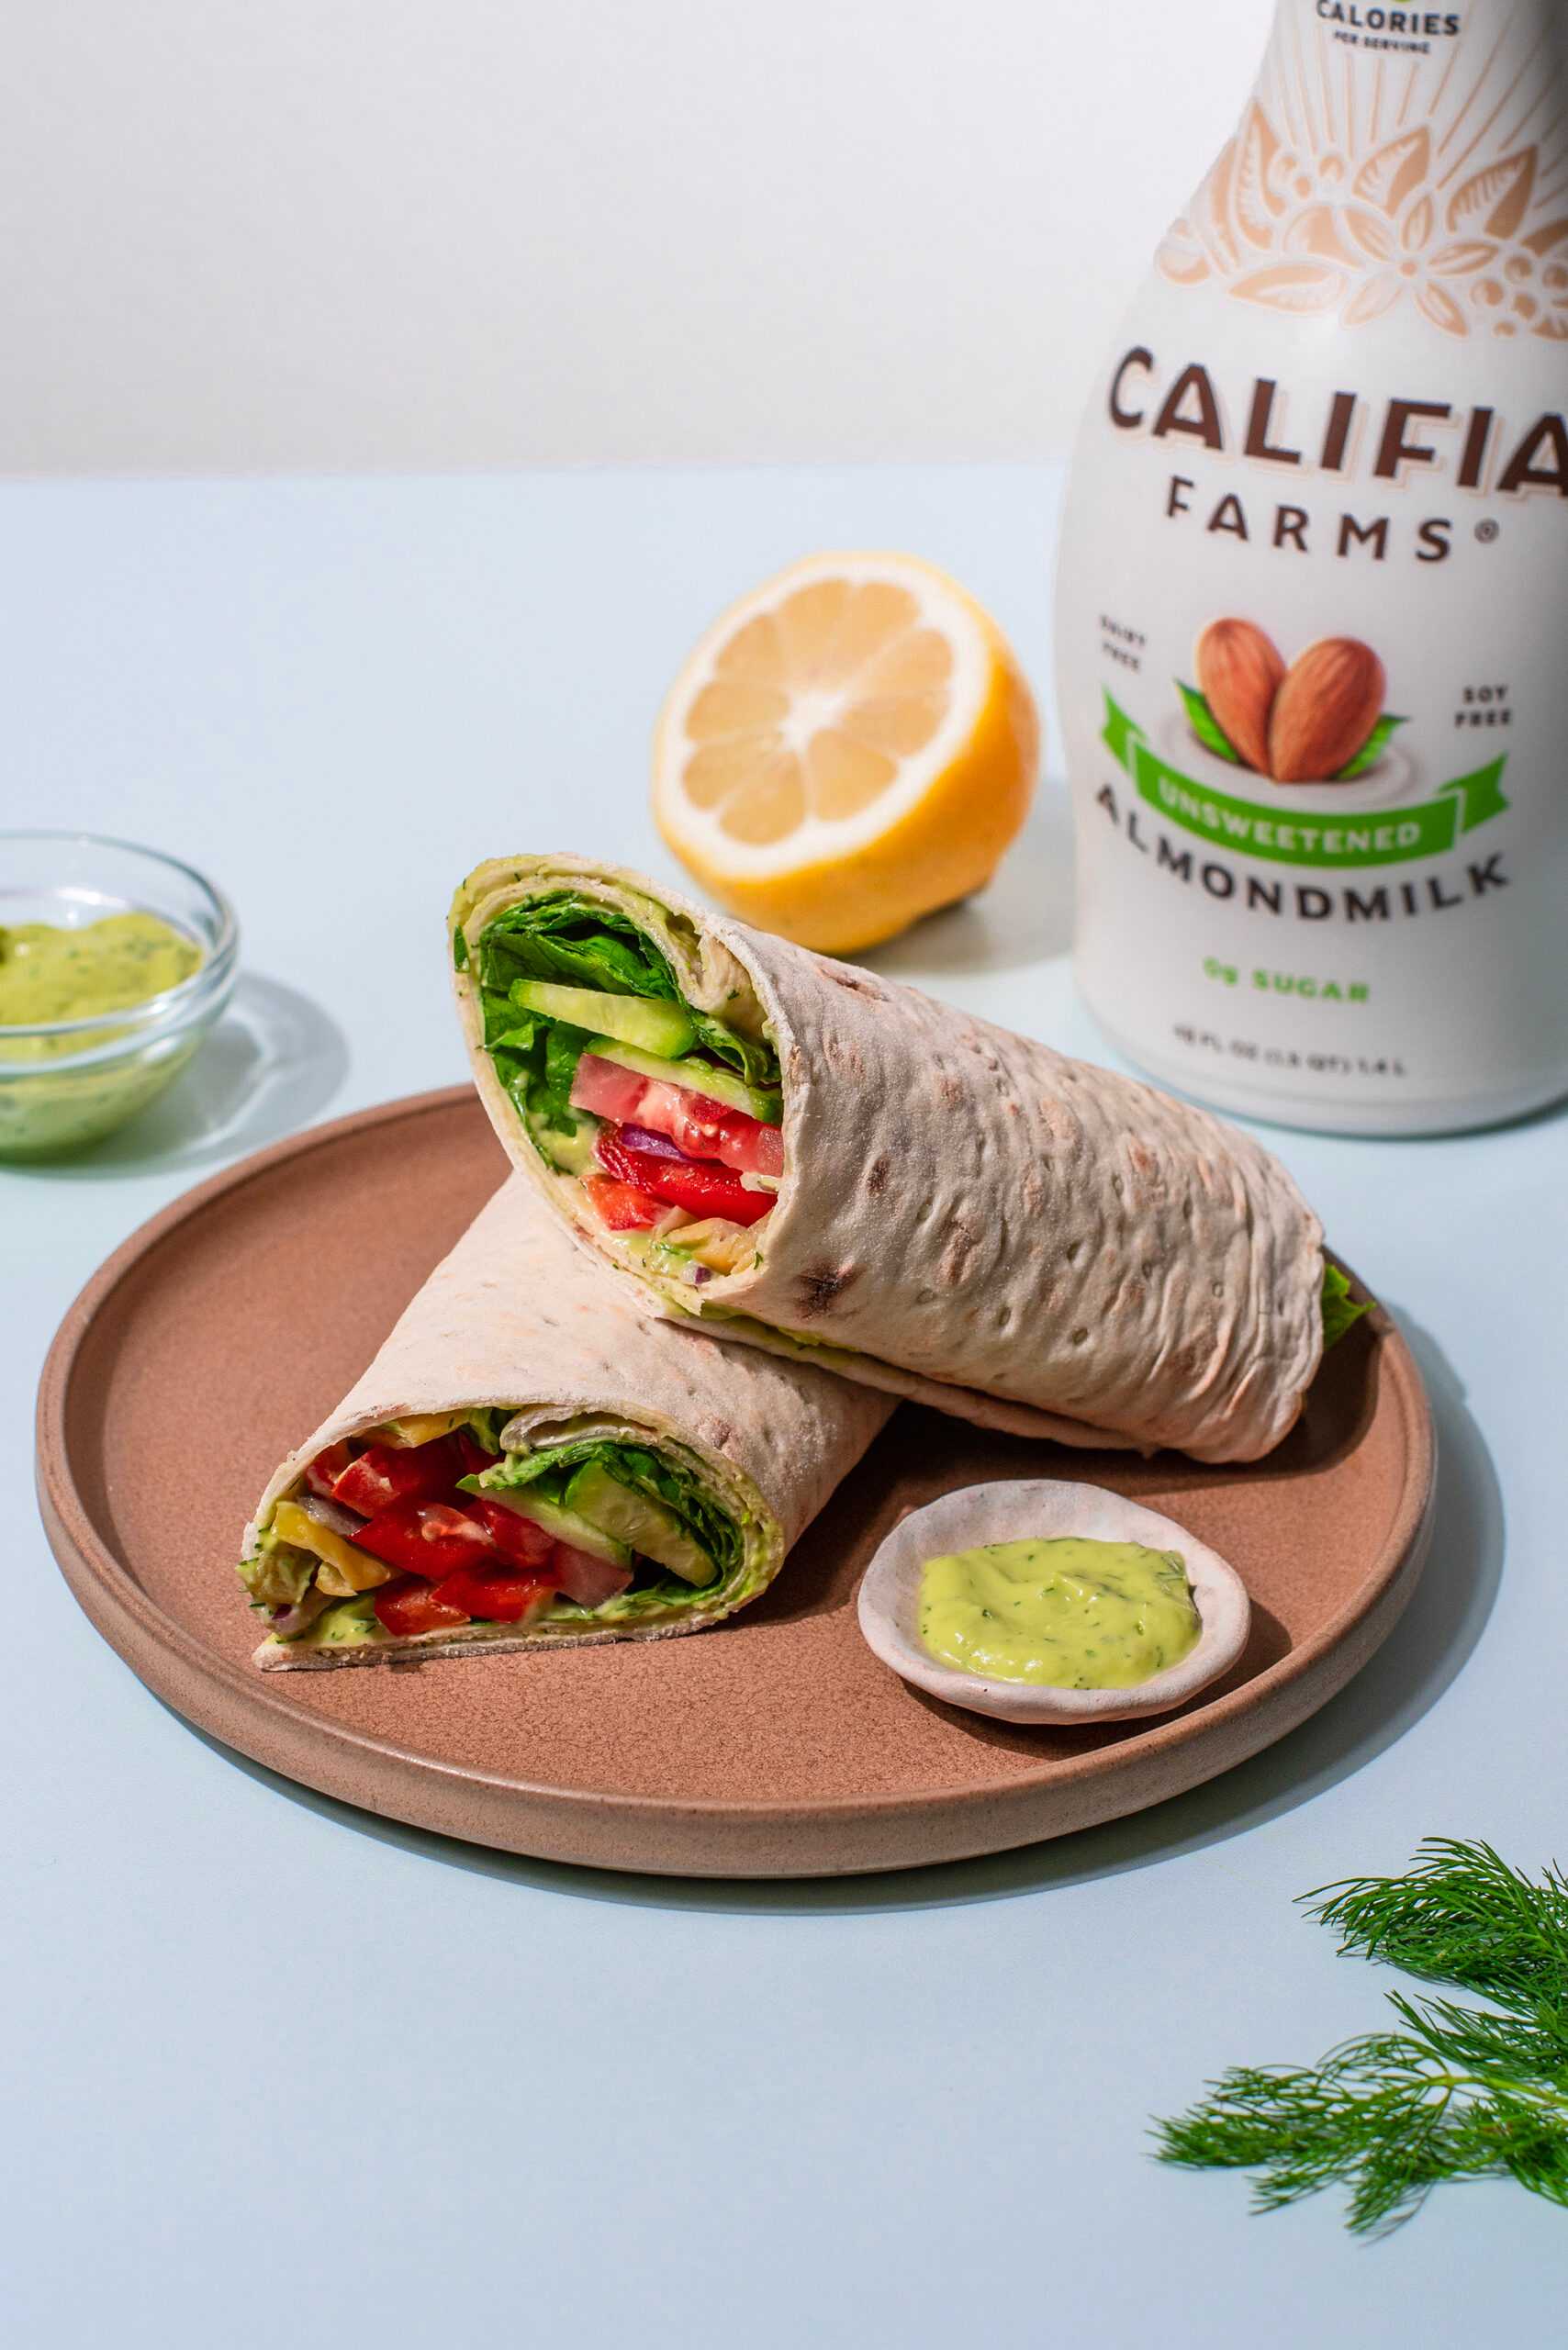 Veggie flatbread wraps sit in the center of the image with Califia Farms Unsweetened Almondmilk in the background.